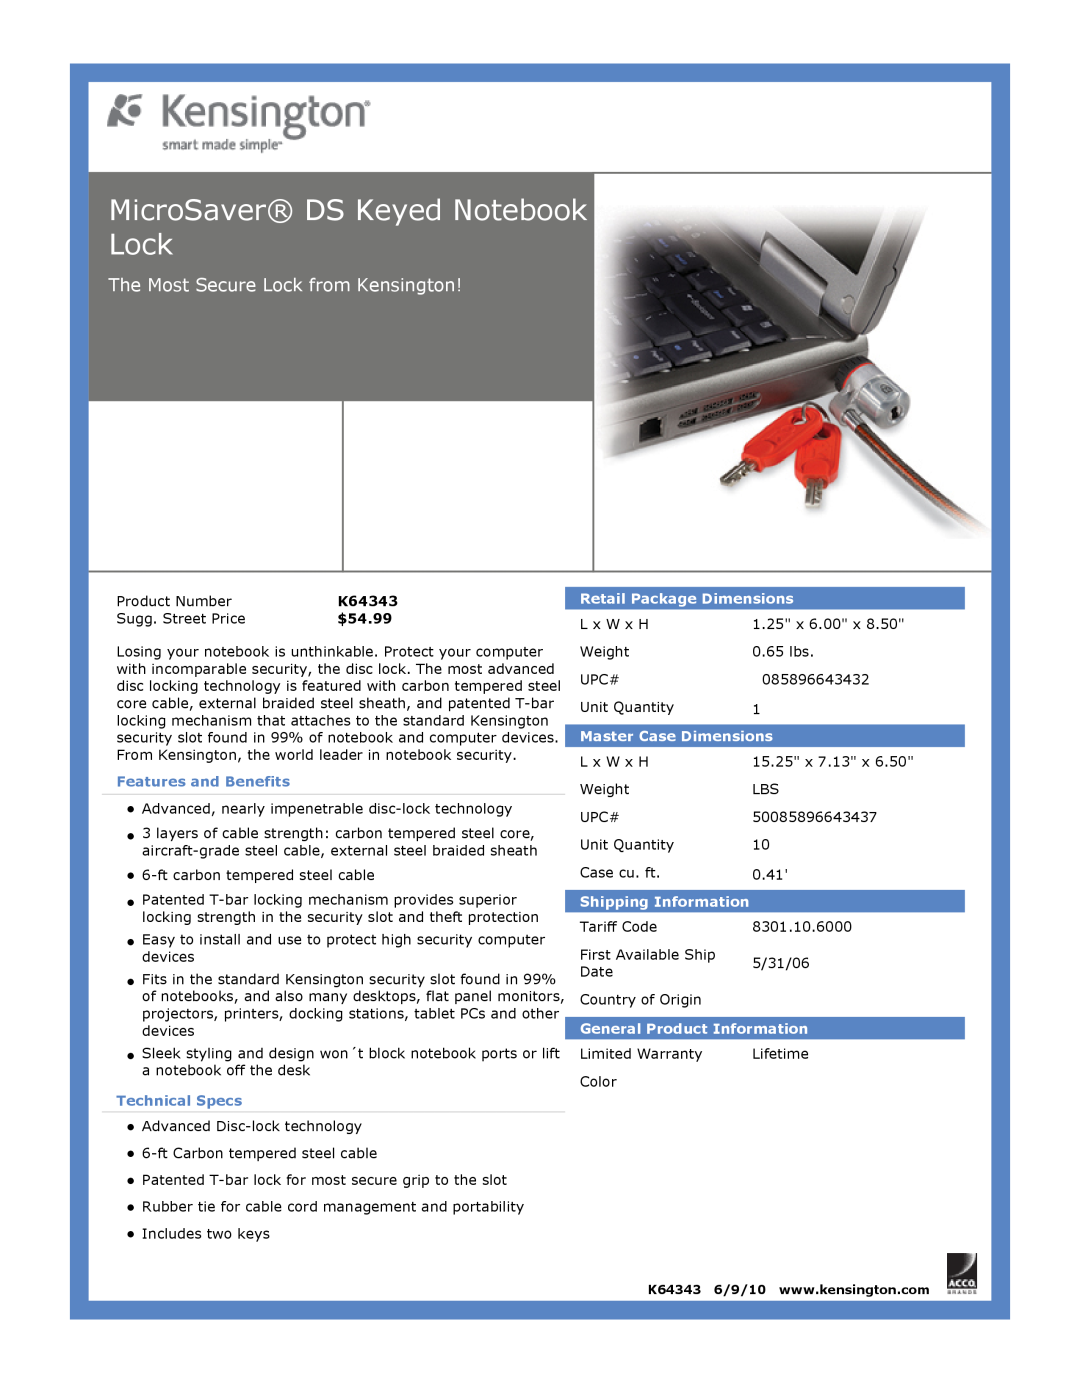 Kensington EU64325 MicroSaver DS Keyed Notebook Lock, The Most Secure Lock from Kensington, $54.99, Features and Benefits 